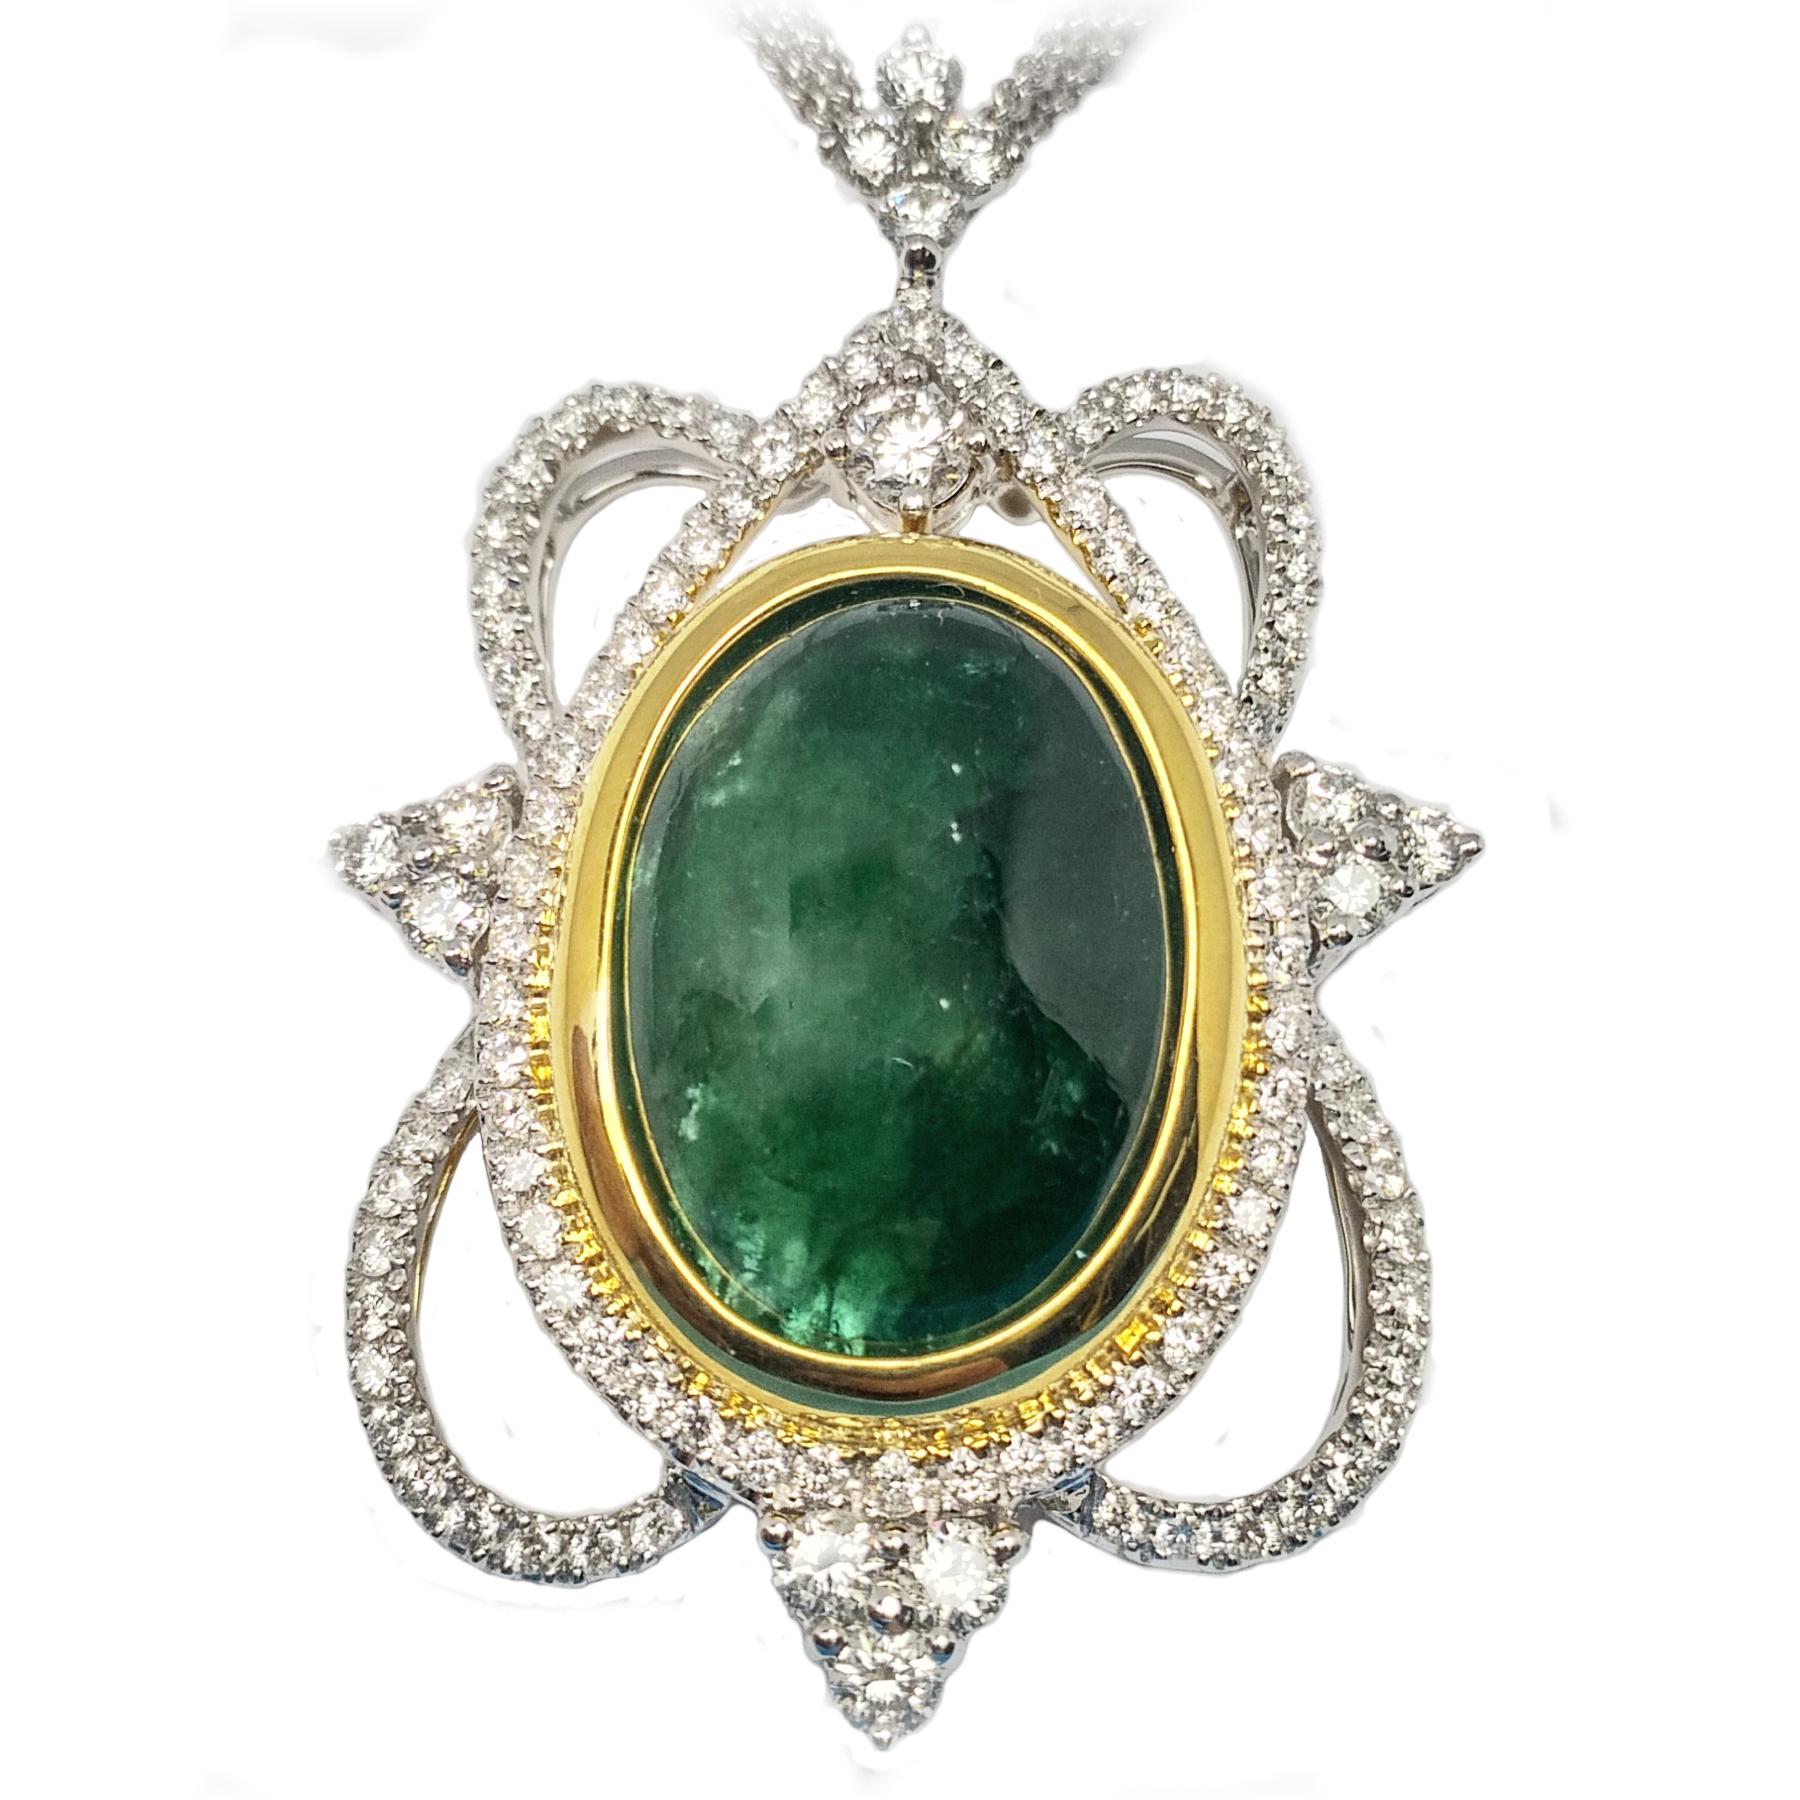 Hunter green cabochon emerald and diamond pendant. Handcrafted oval, hunter green natural emerald mounted in yellow gold bezel frame, accented with round brilliant cut diamond design, set in 18 karat white and yellow gold, along with multi strand,